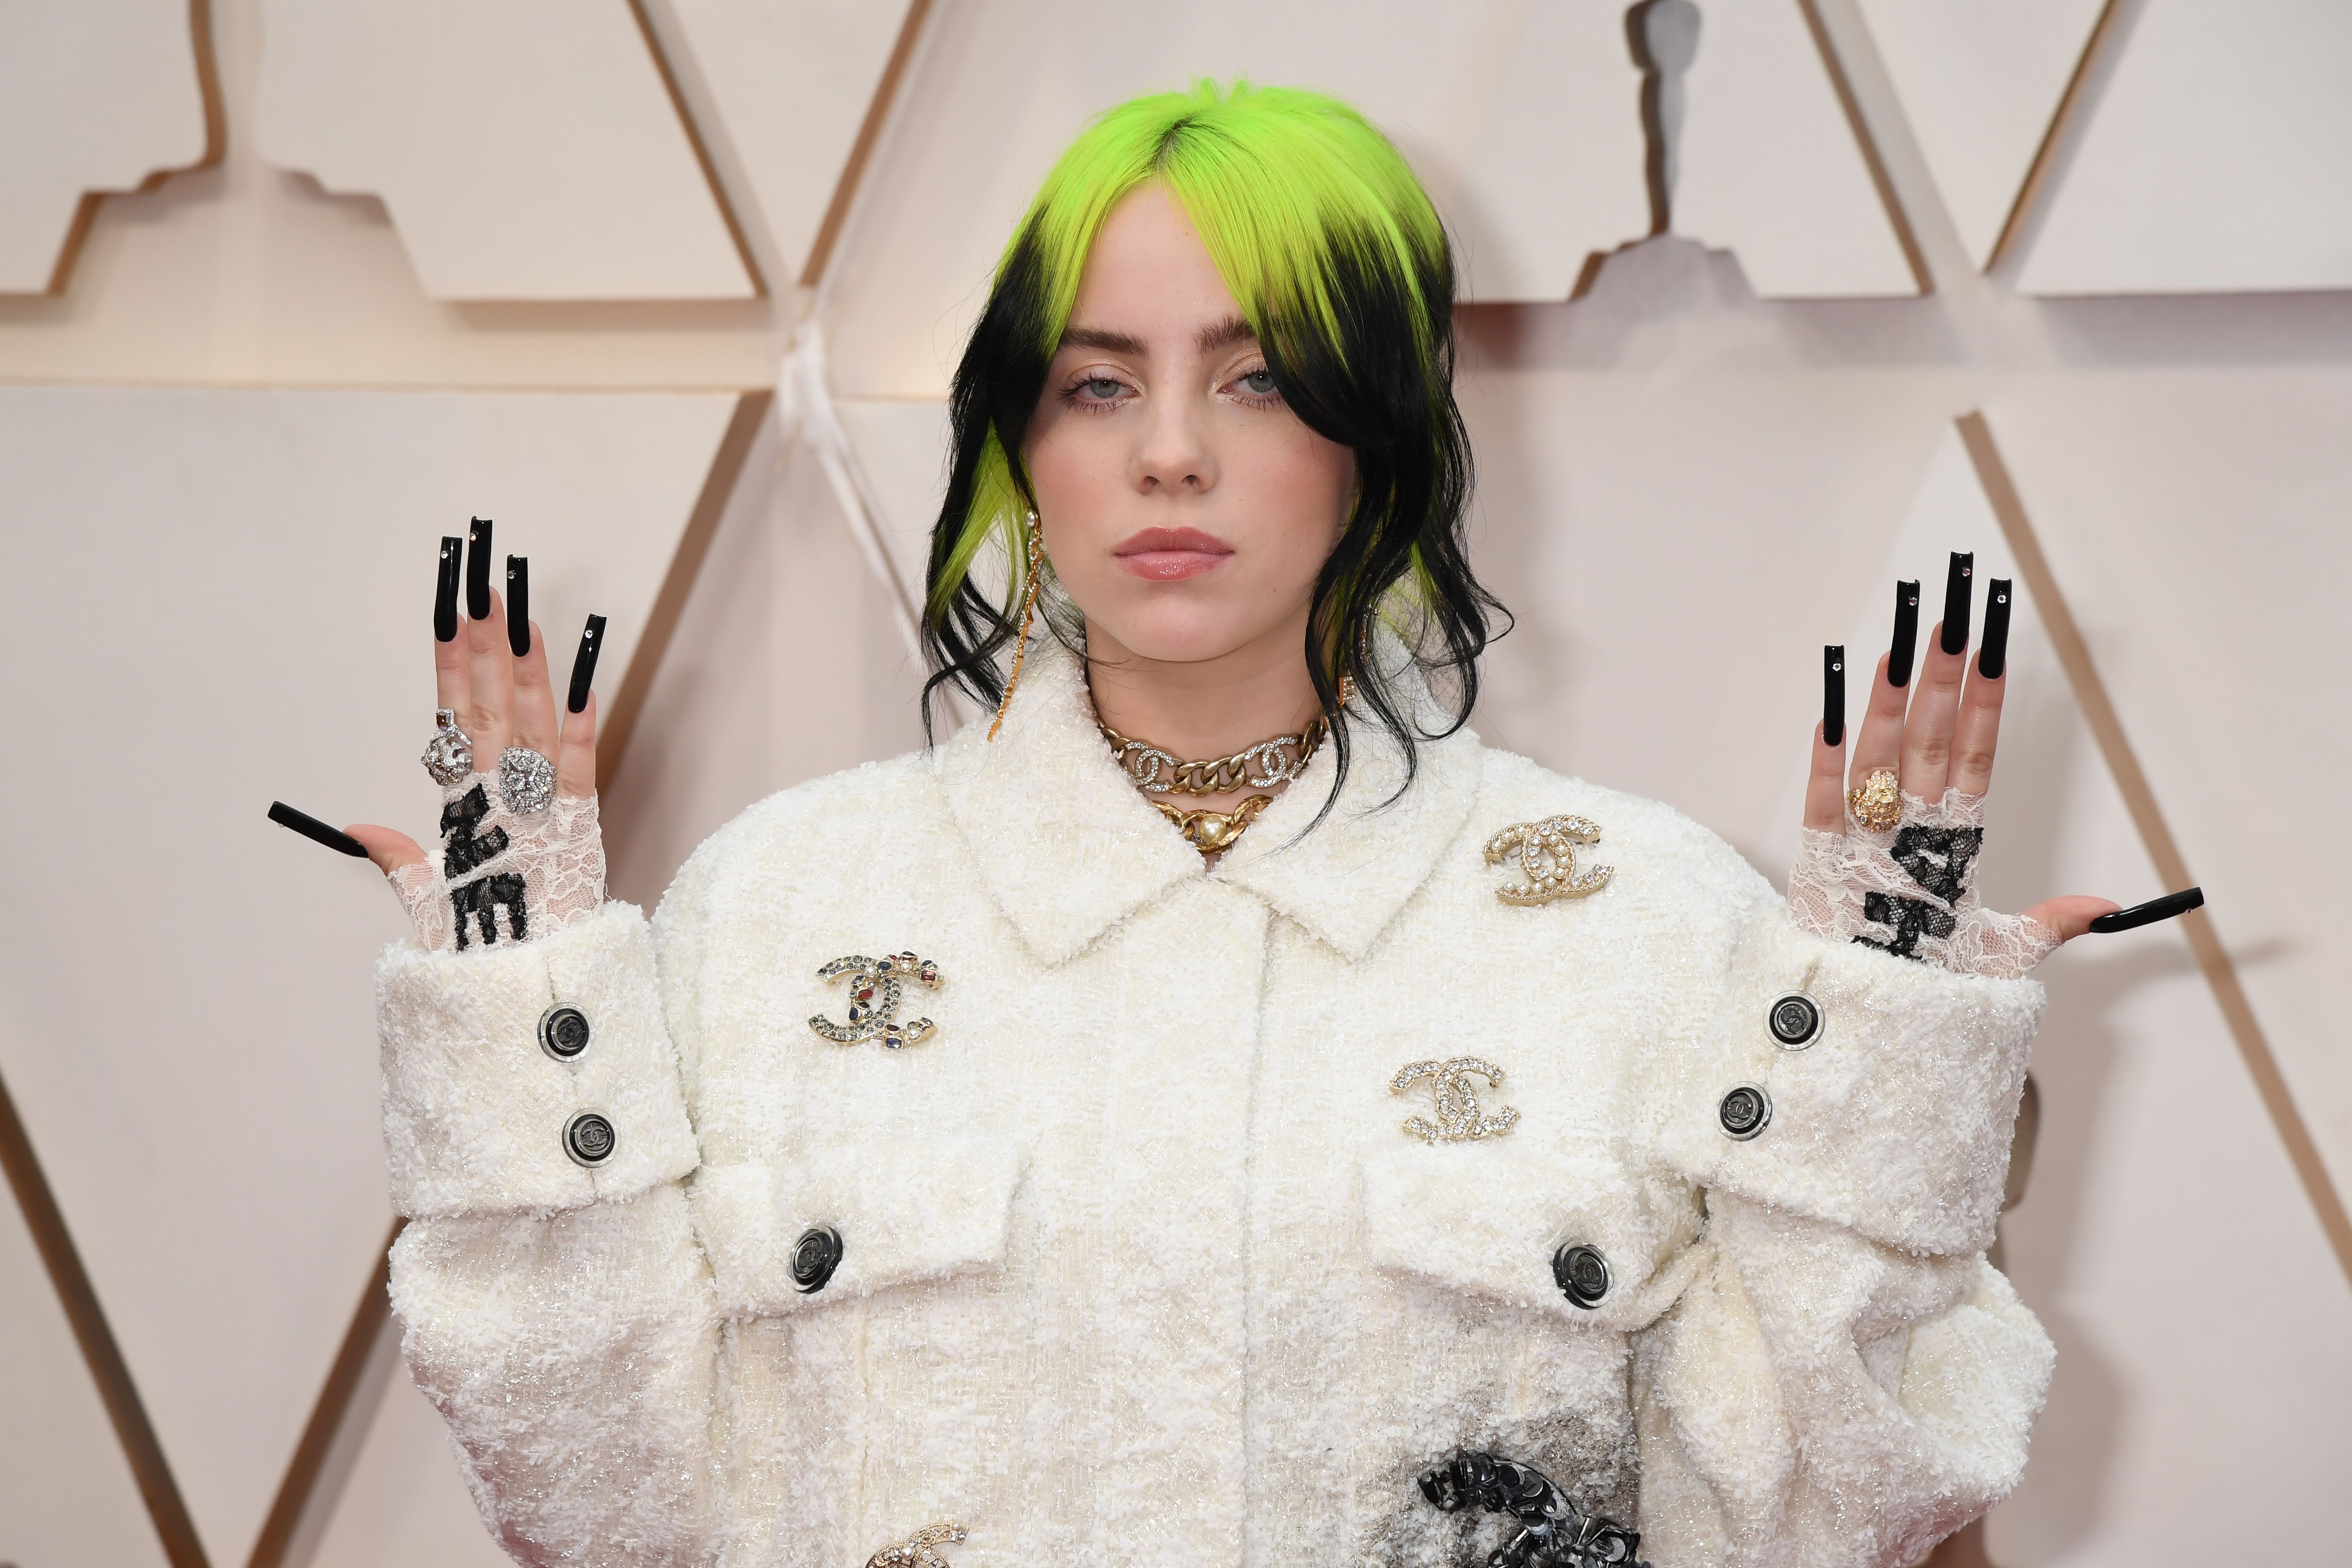 Billie Eilish Wears A Baggy Chanel Suit To The 2020 Oscars